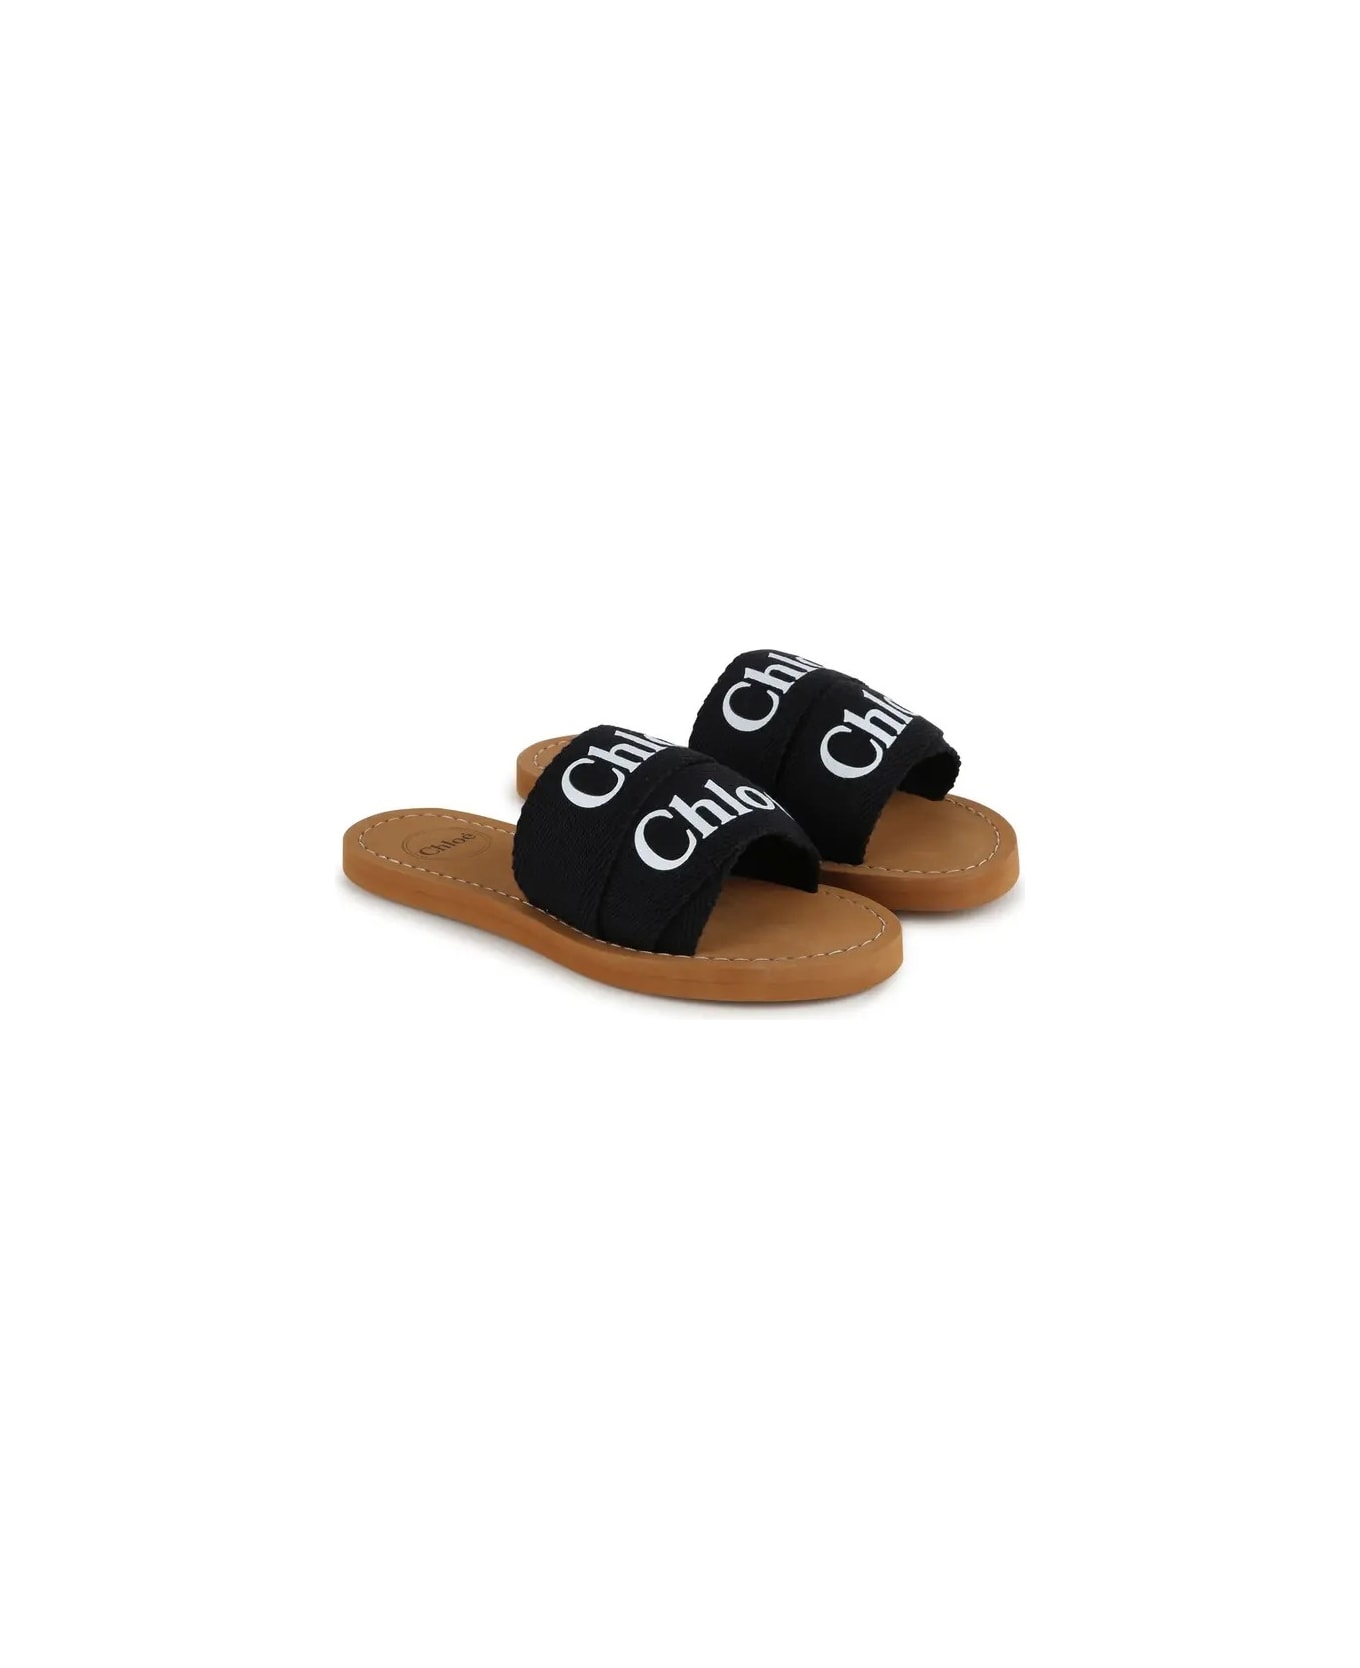 Chloé Woody Sandals In Black Canvas With Logo - Nero シューズ